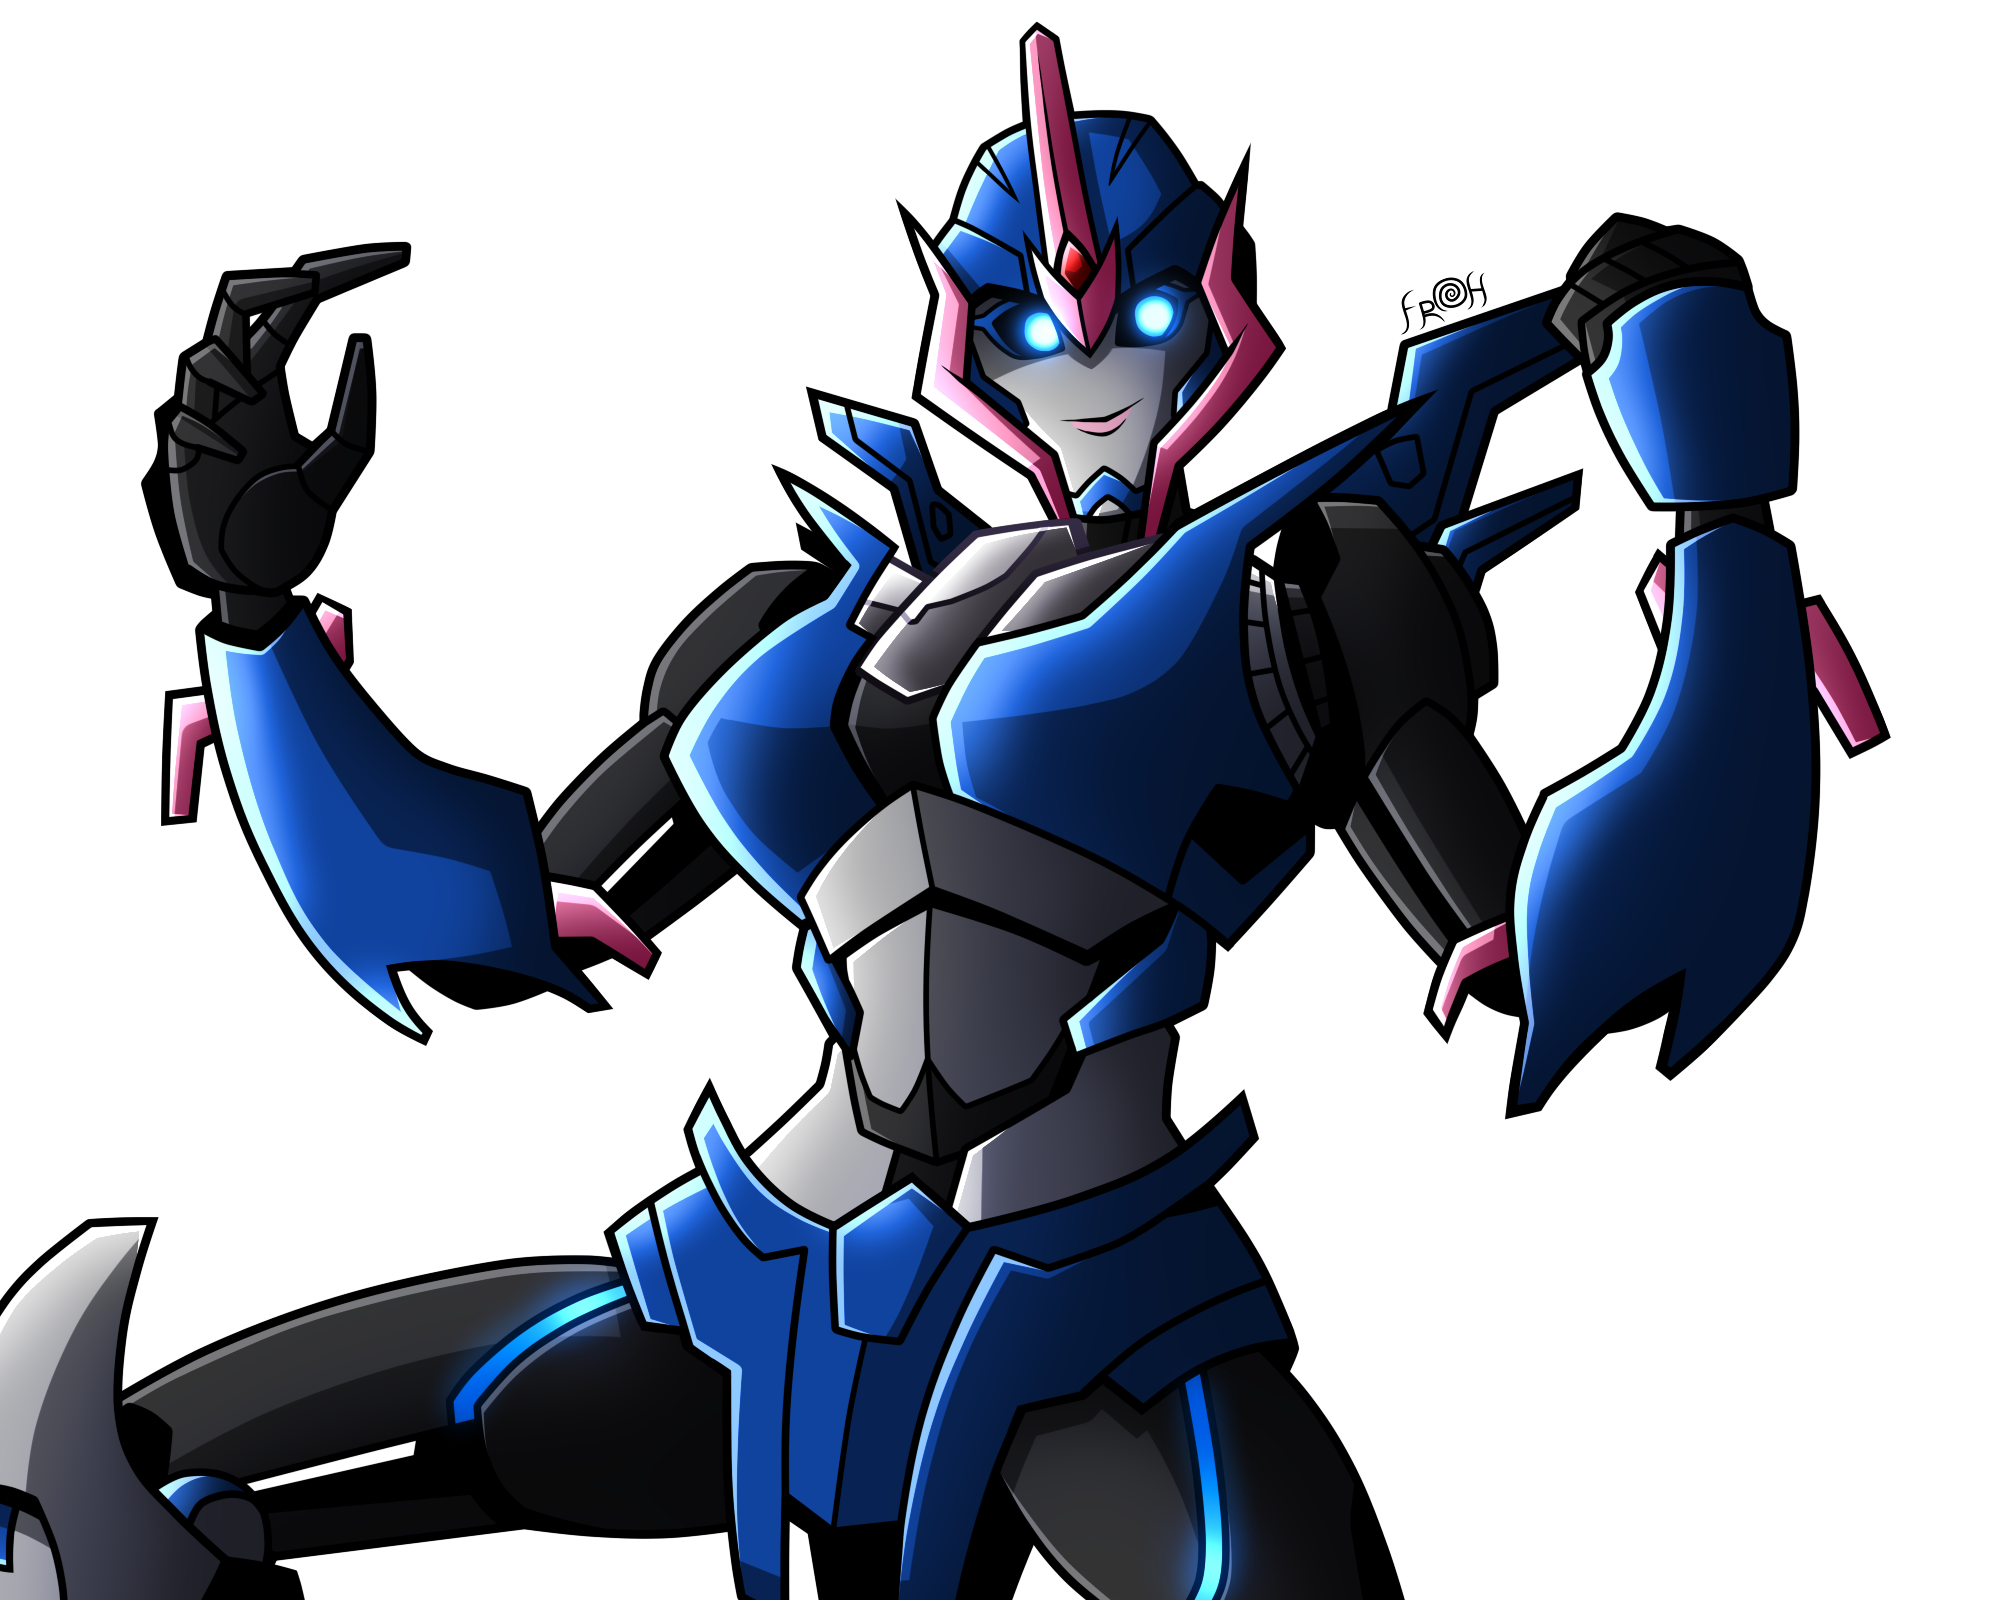 Transformers Prime Arcee render by The5NewKnights on DeviantArt